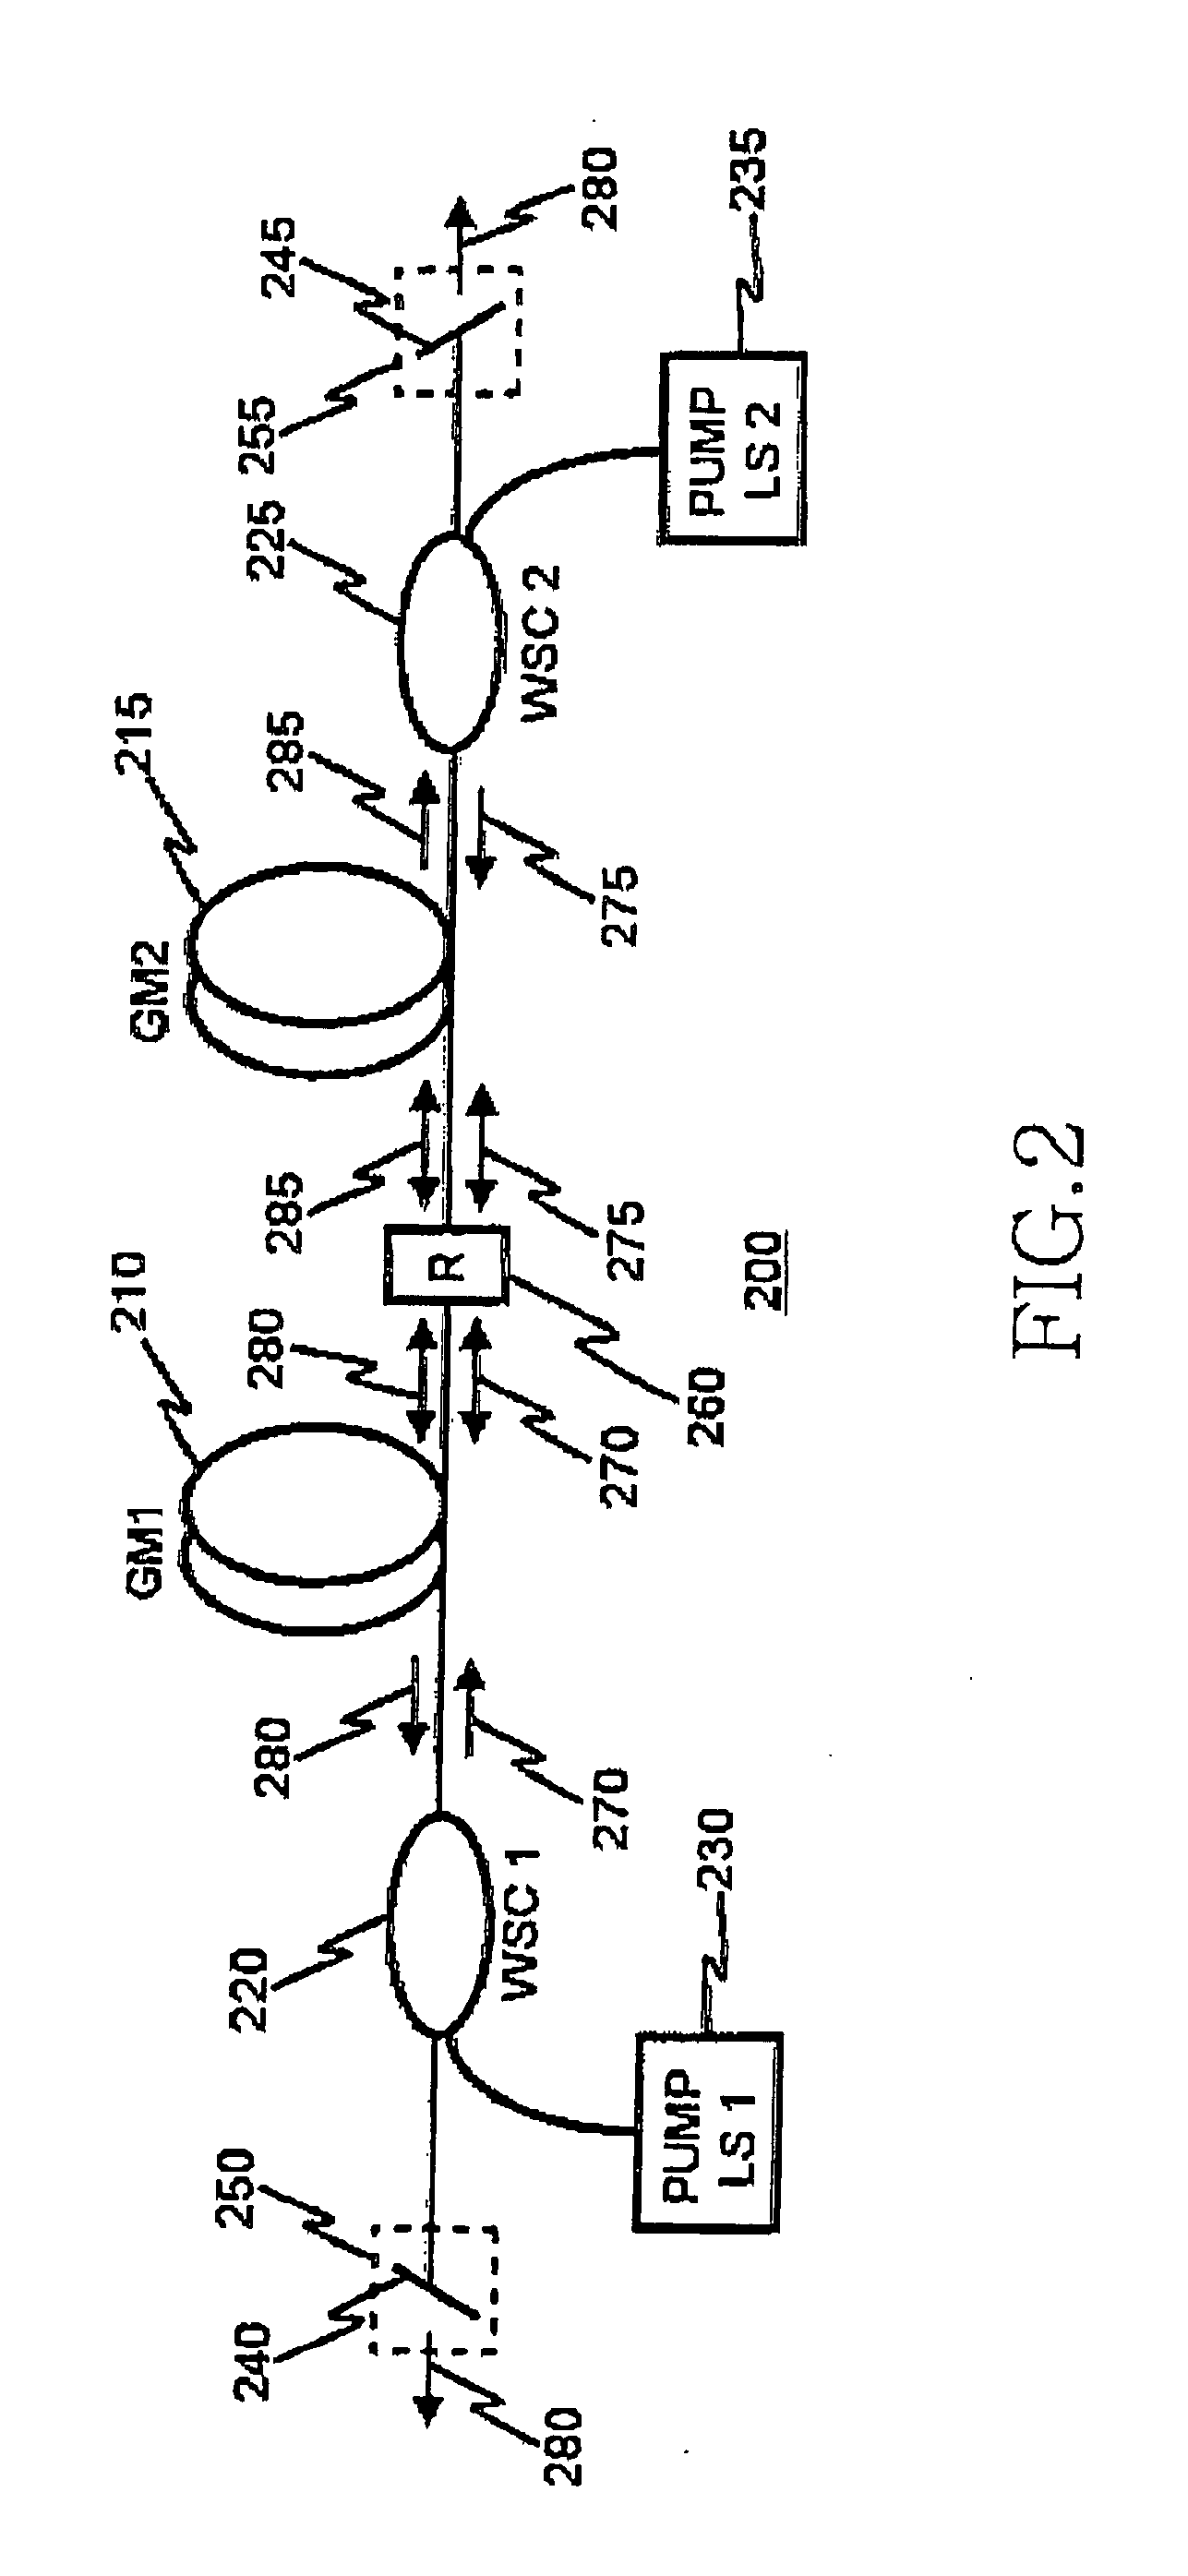 Dual-port broadband light source with independently controllable output powers